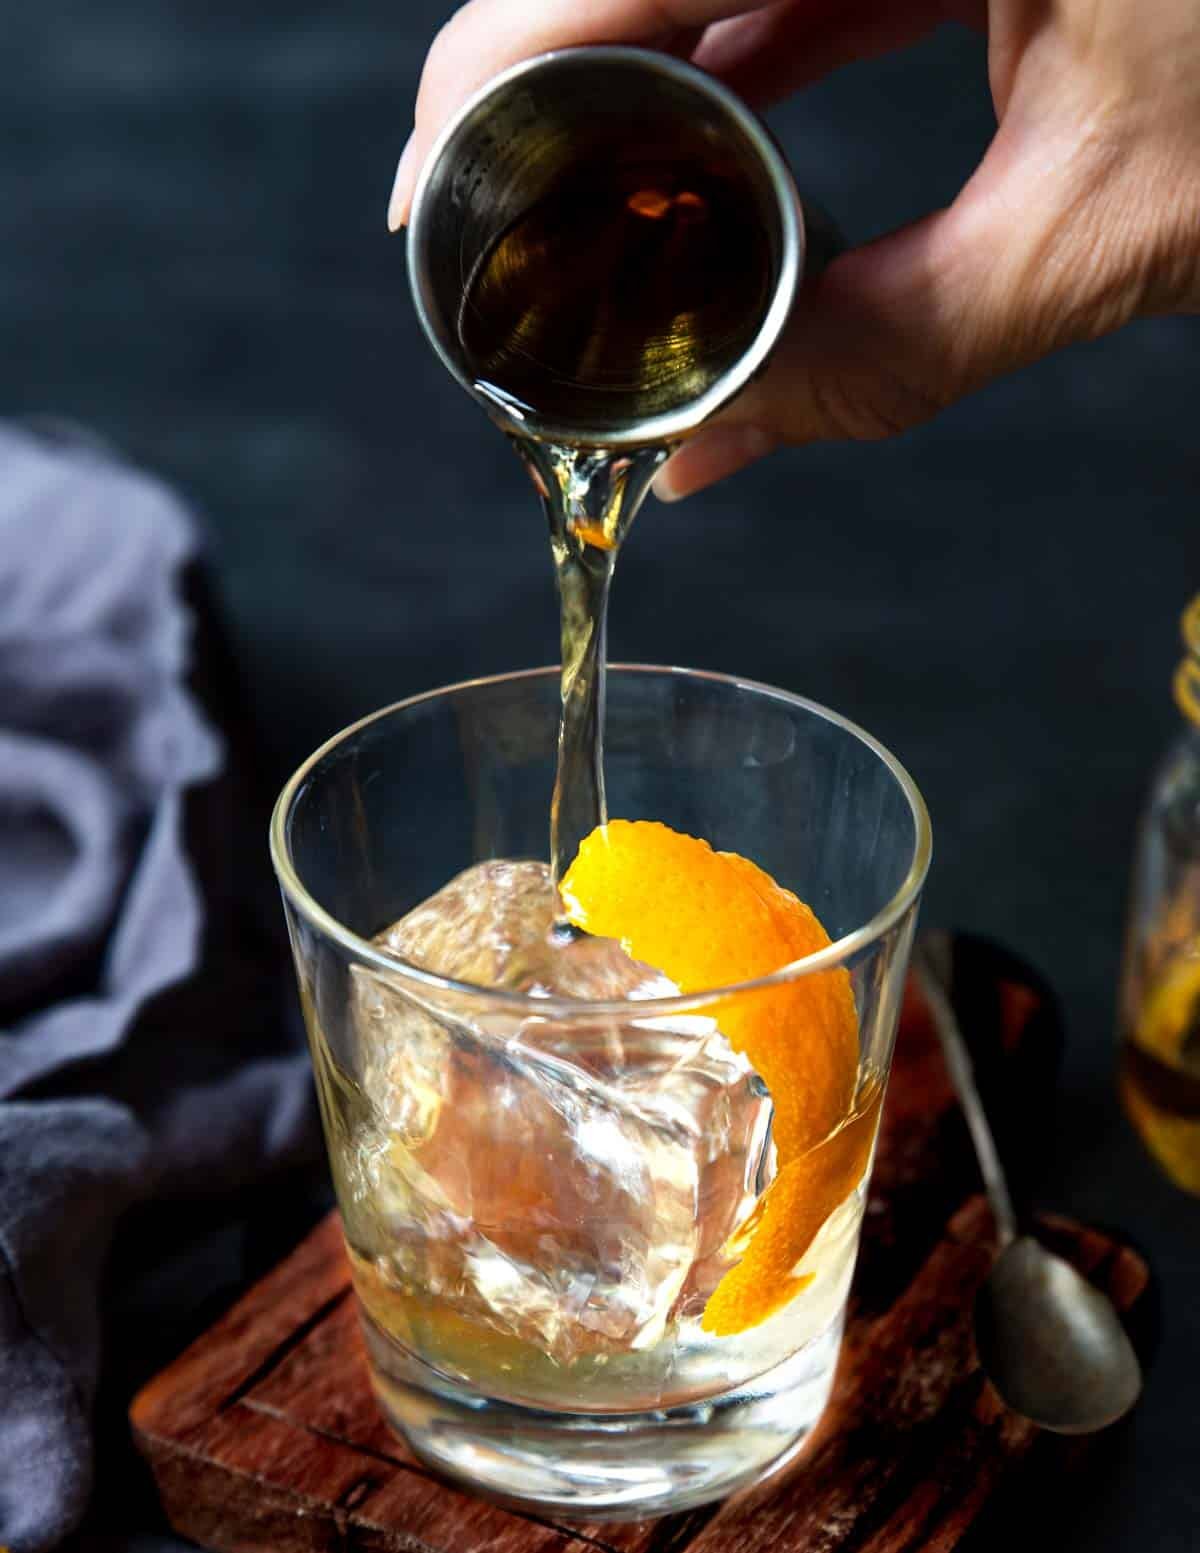 pouring Añejo over ice